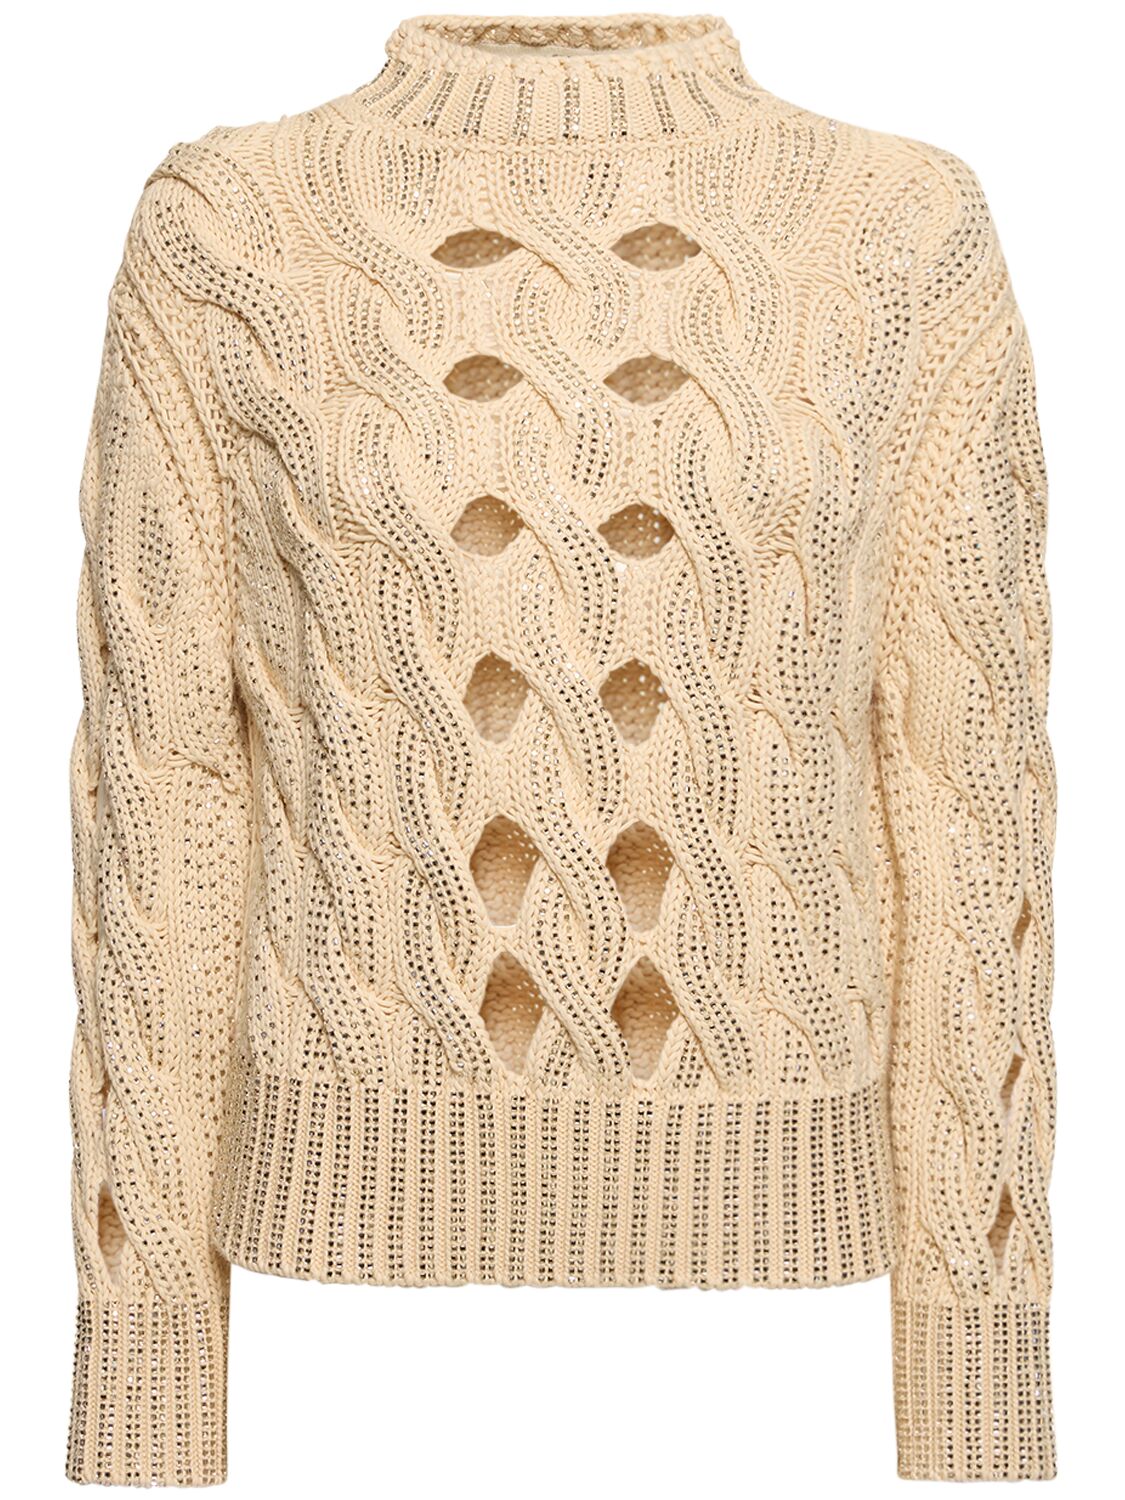 Image of Cotton Blend Openwork Sweater